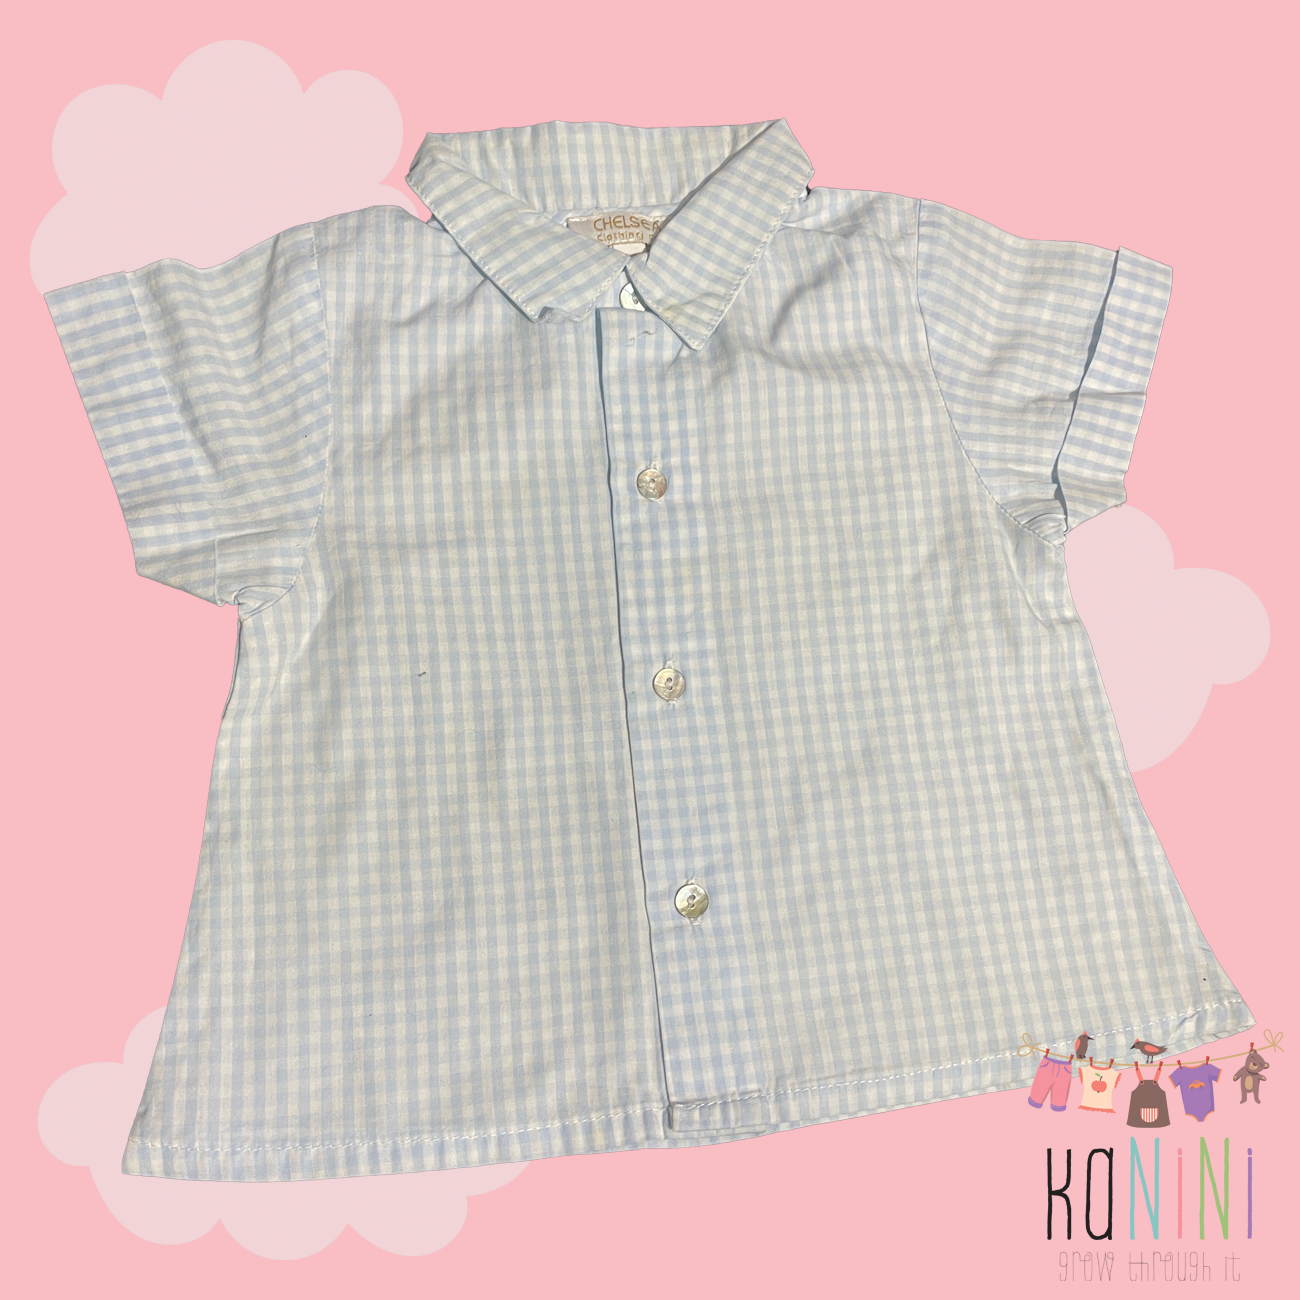 Featured image for “Chelsea Clothing Co 12 - 18 Months Girls Button Shirt”